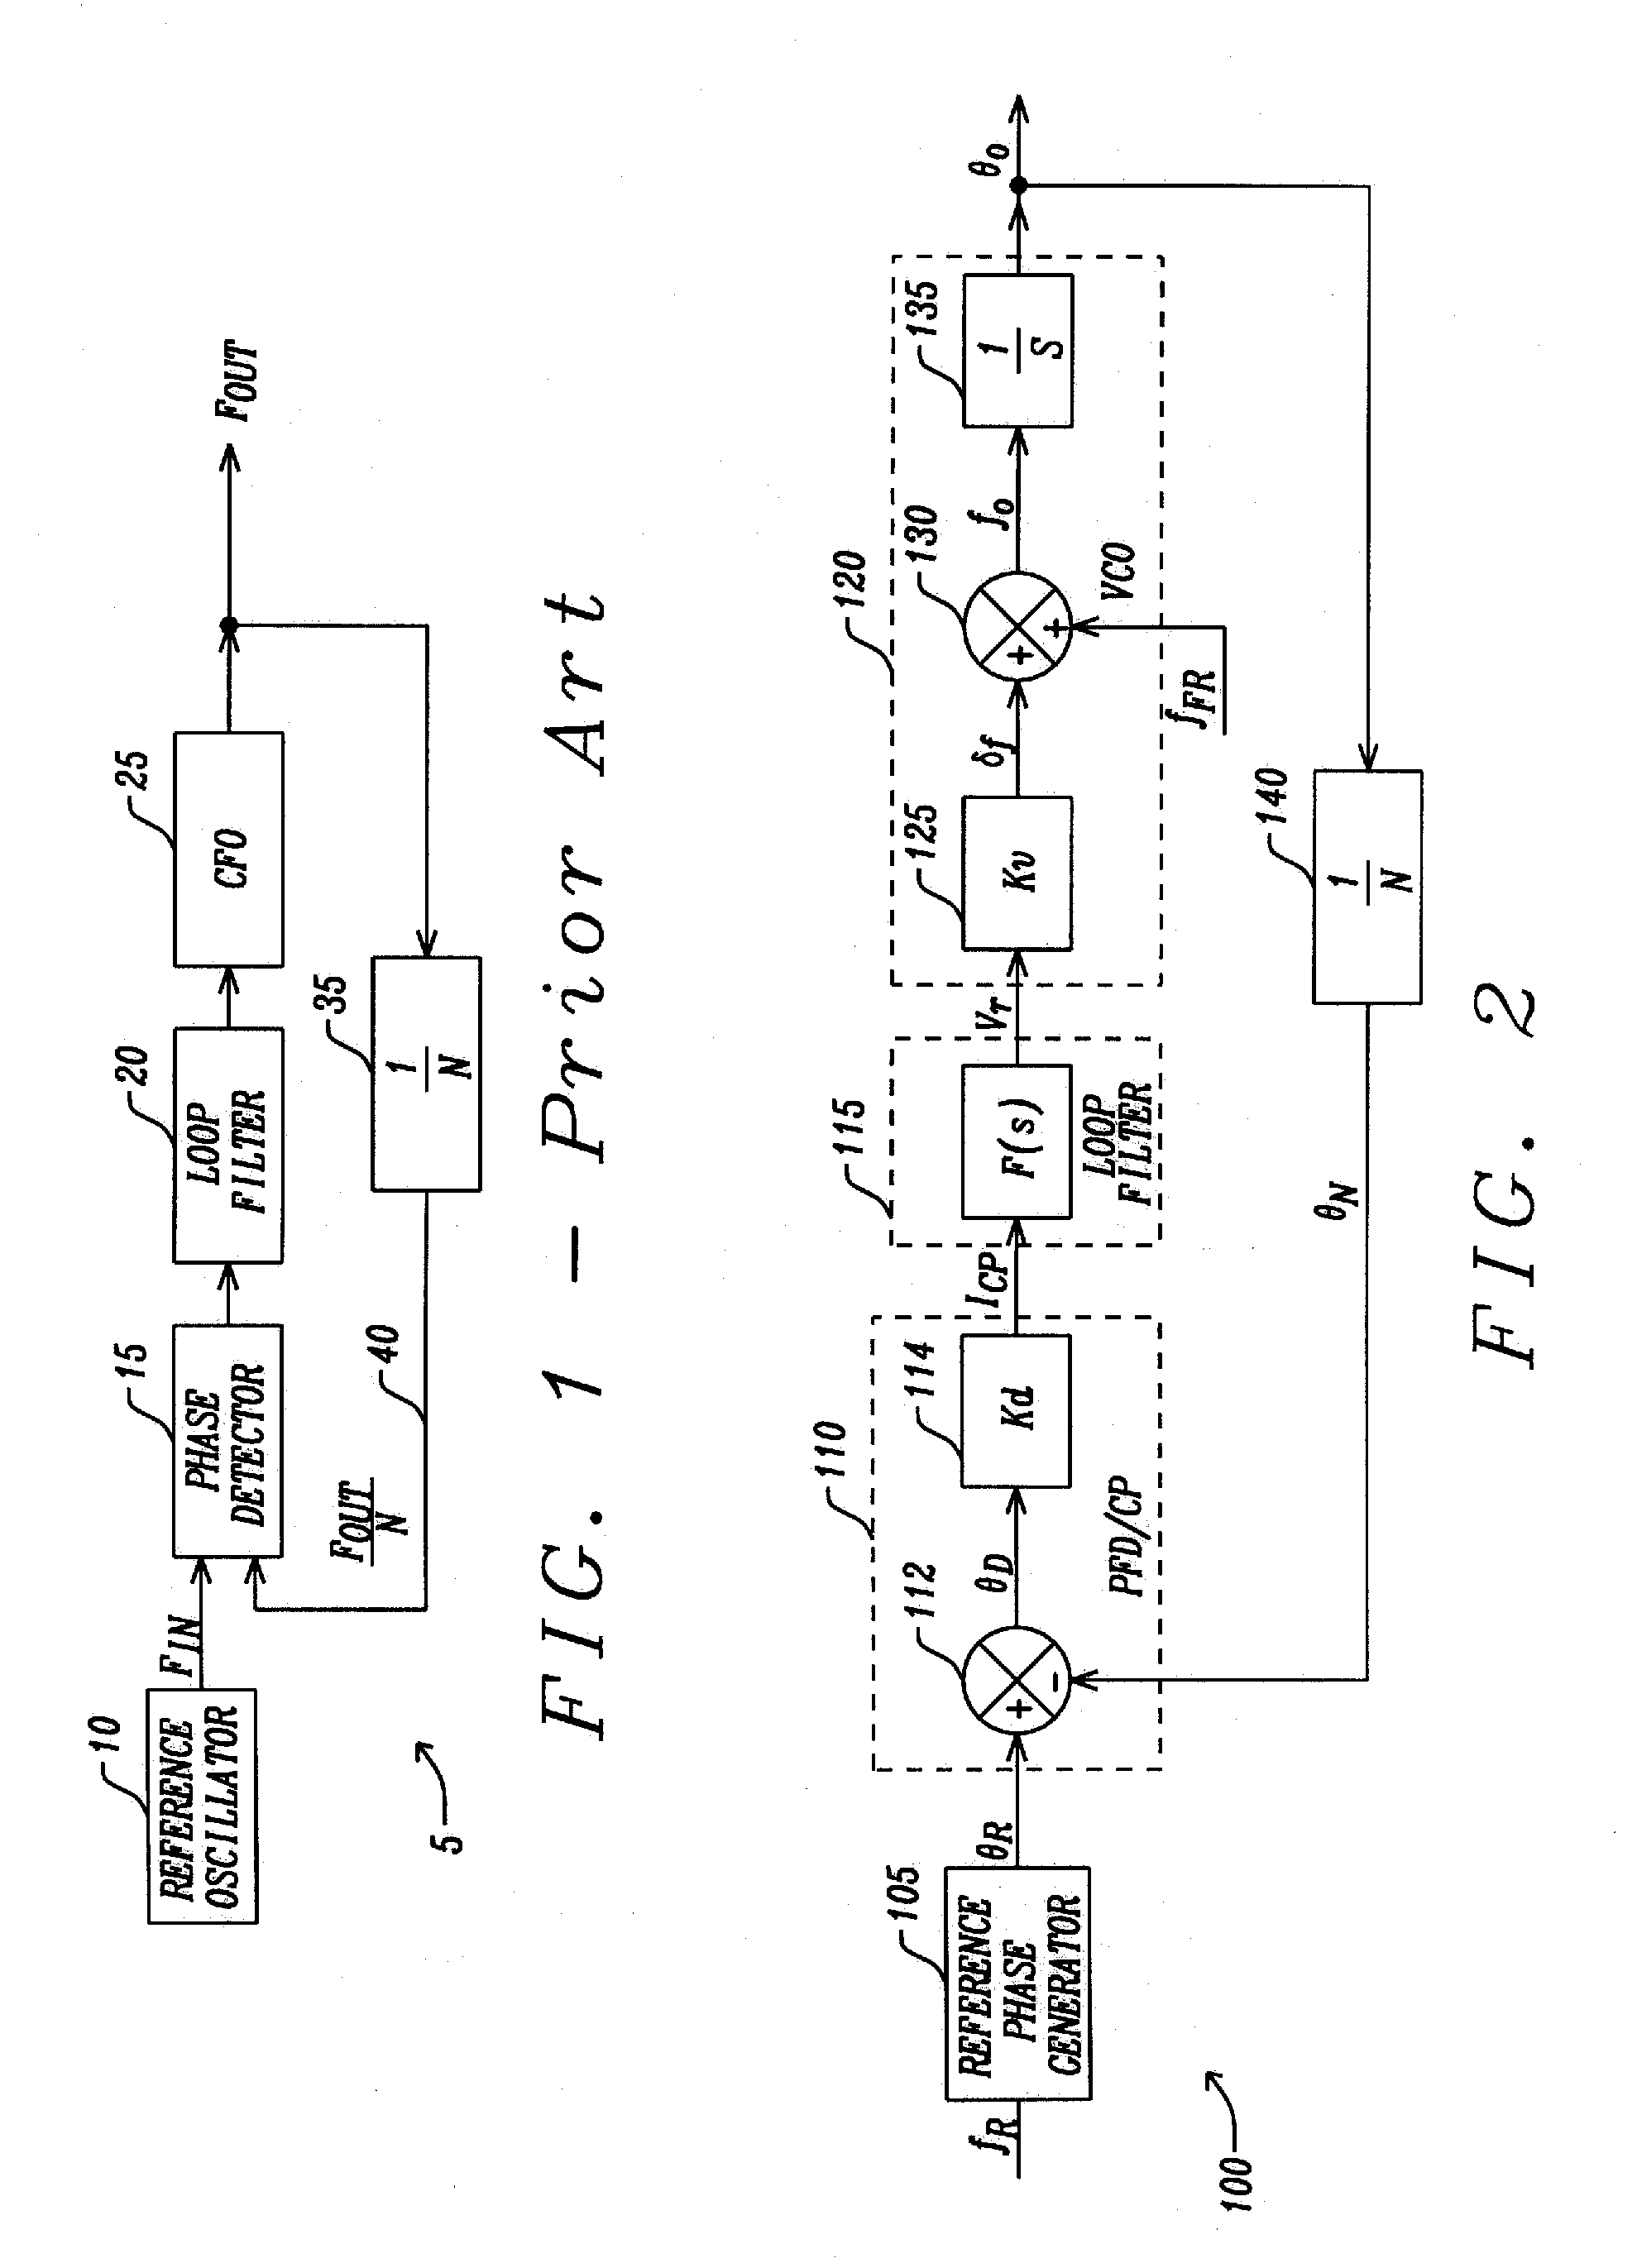 Fast settling phase locked loop (PLL) with optimum spur reduction